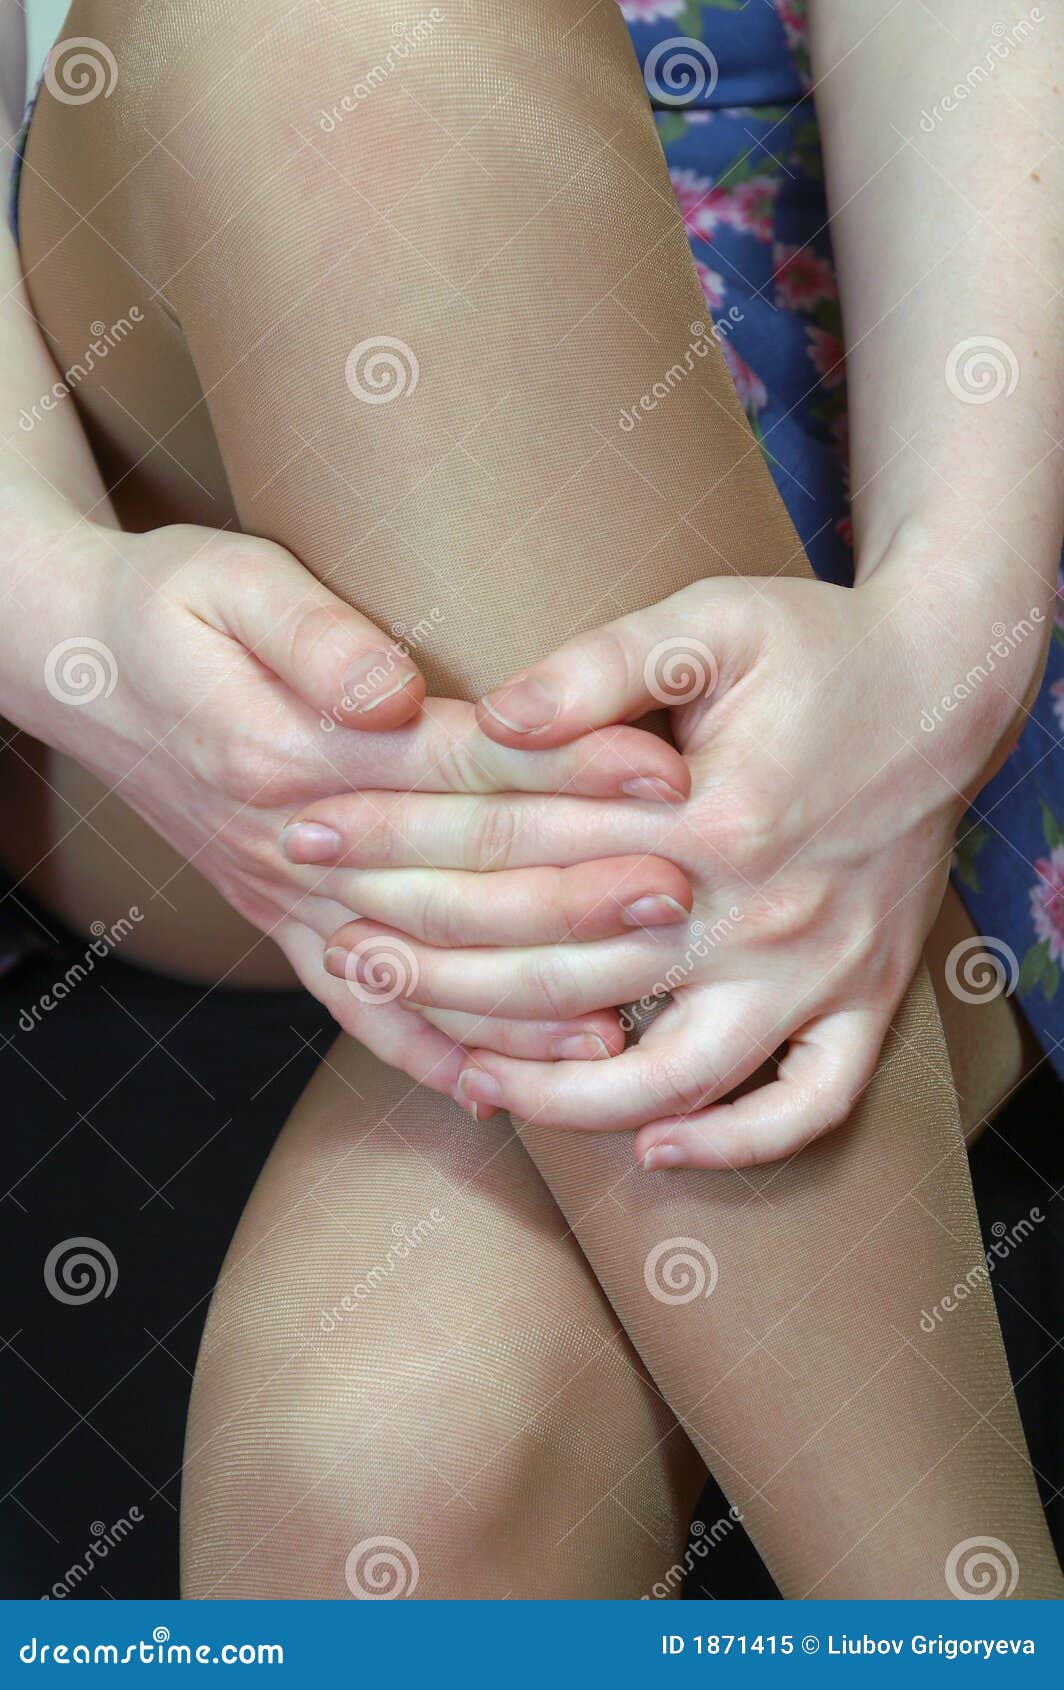 The Womens Hands On The Naked Knees Picture image